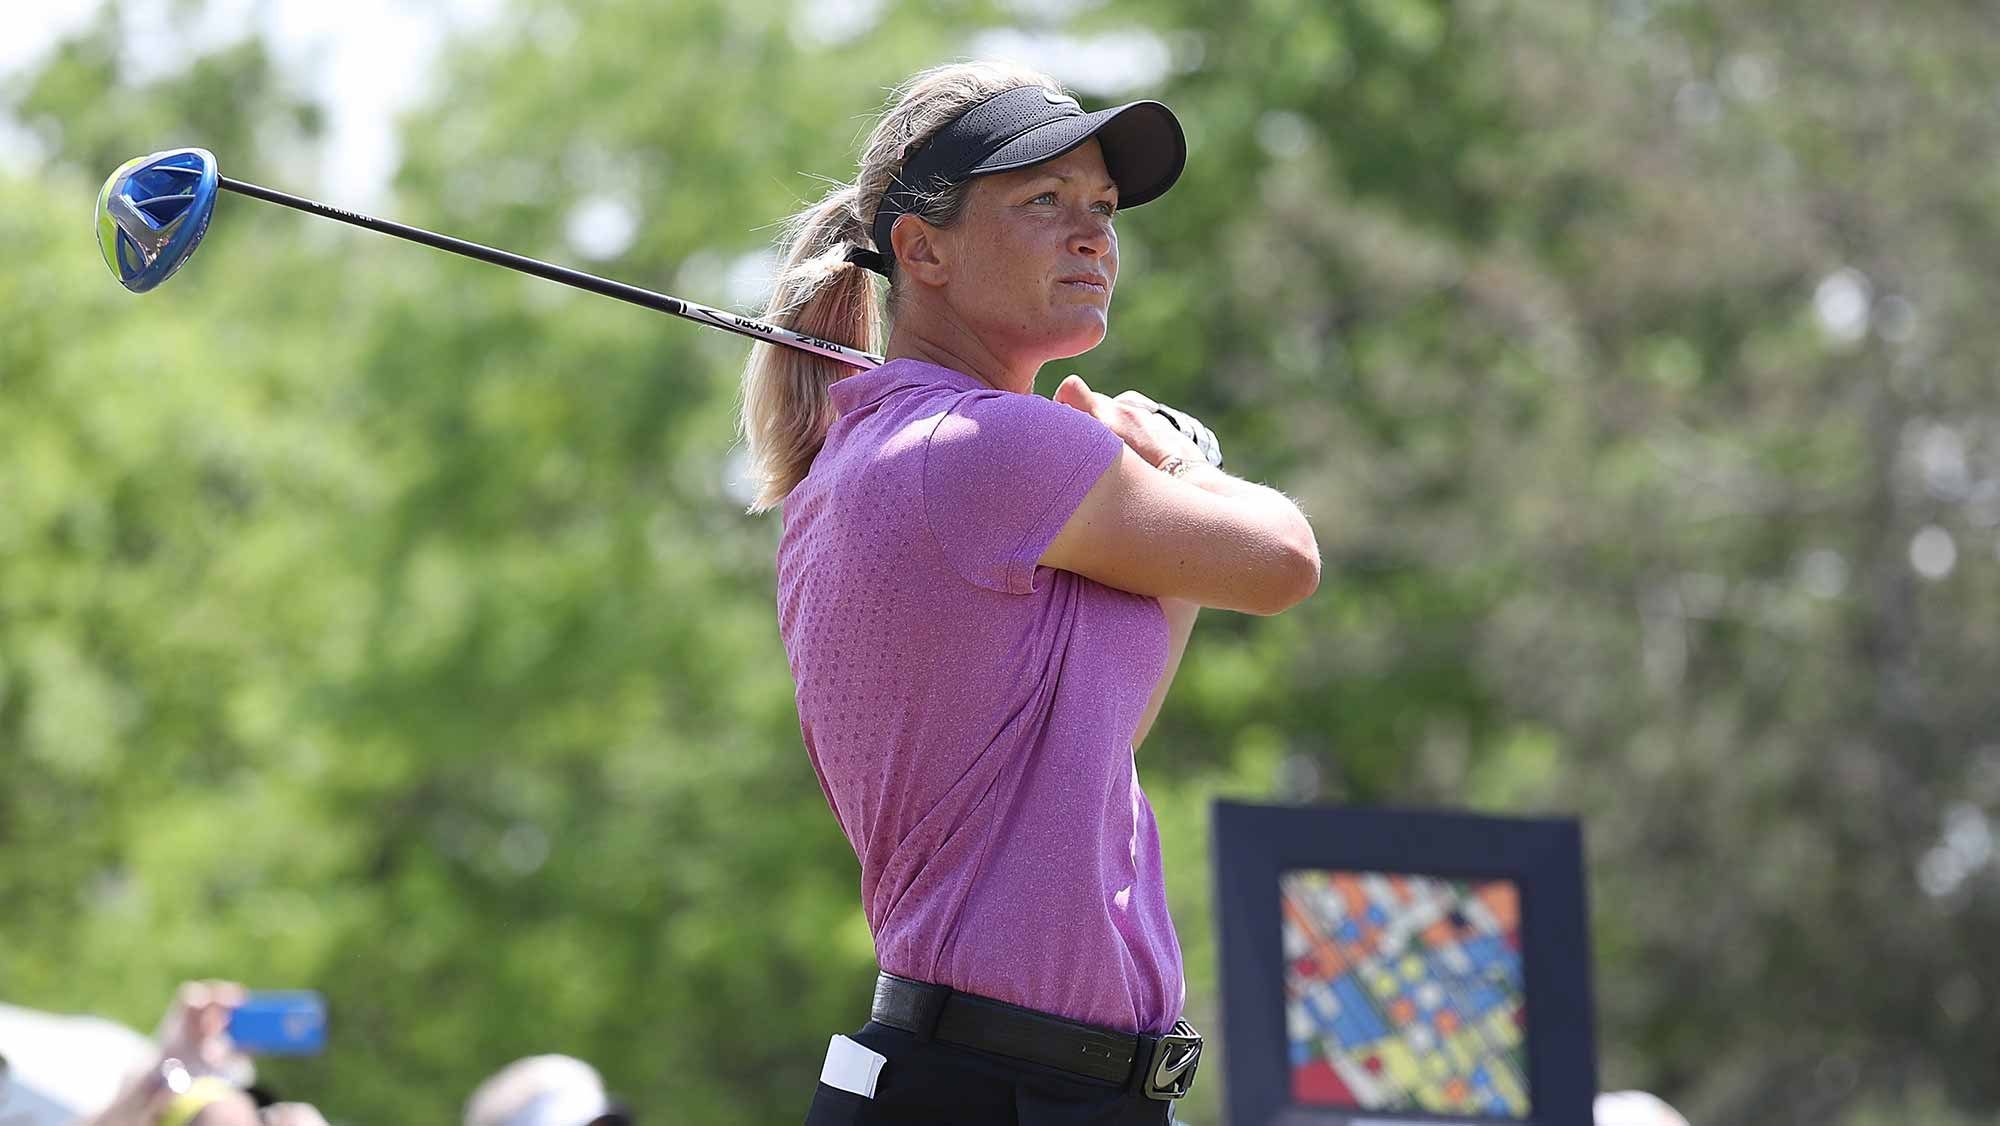 Suzann Pettersen from Norway hits her tee shot on the first hole during the final round of the LPGA Volvik Championship